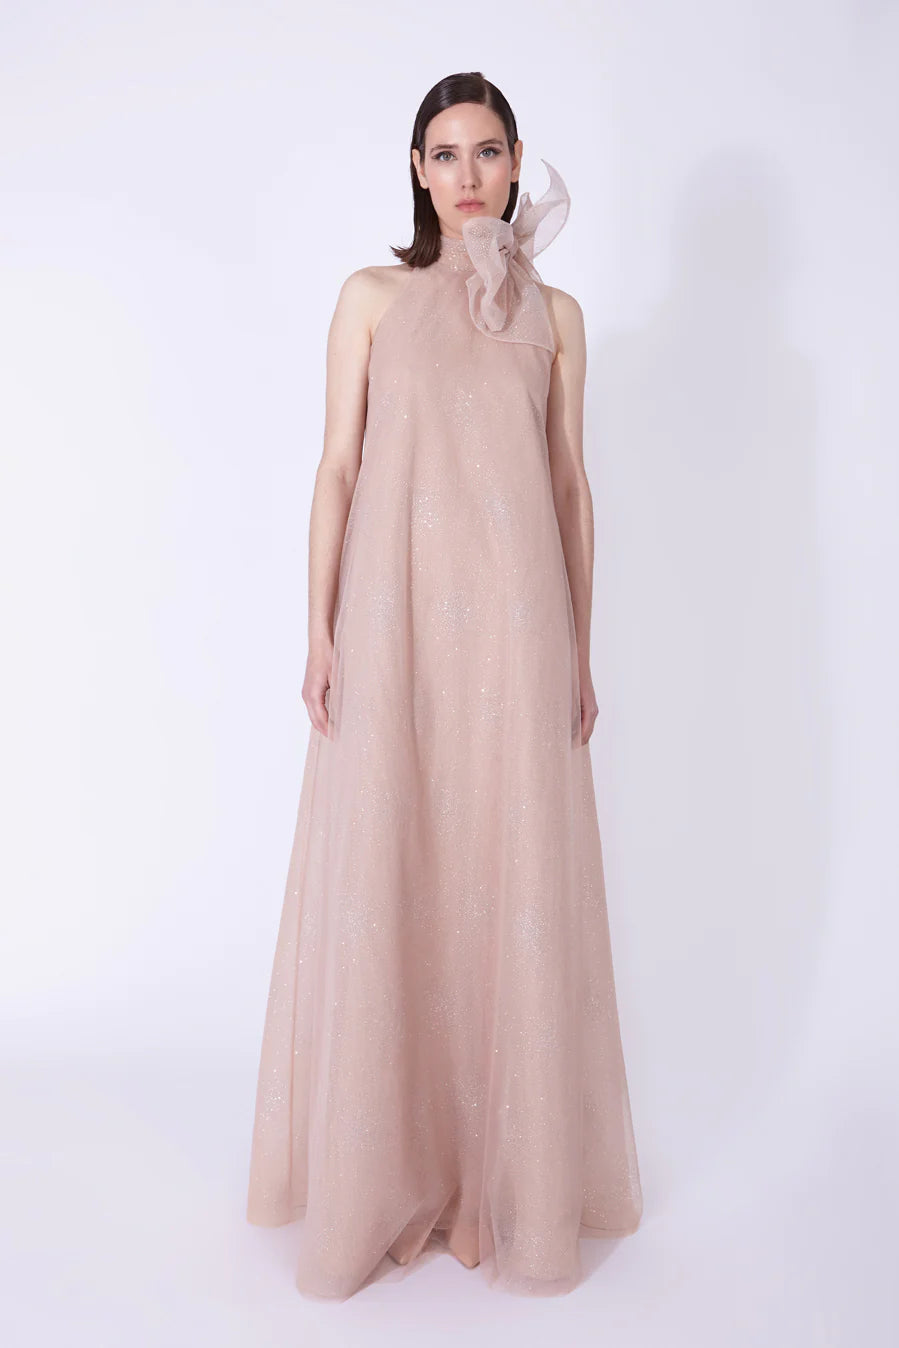 THE 2ND SKIN HALTER NECK GLITTER GOWN IN NUDE